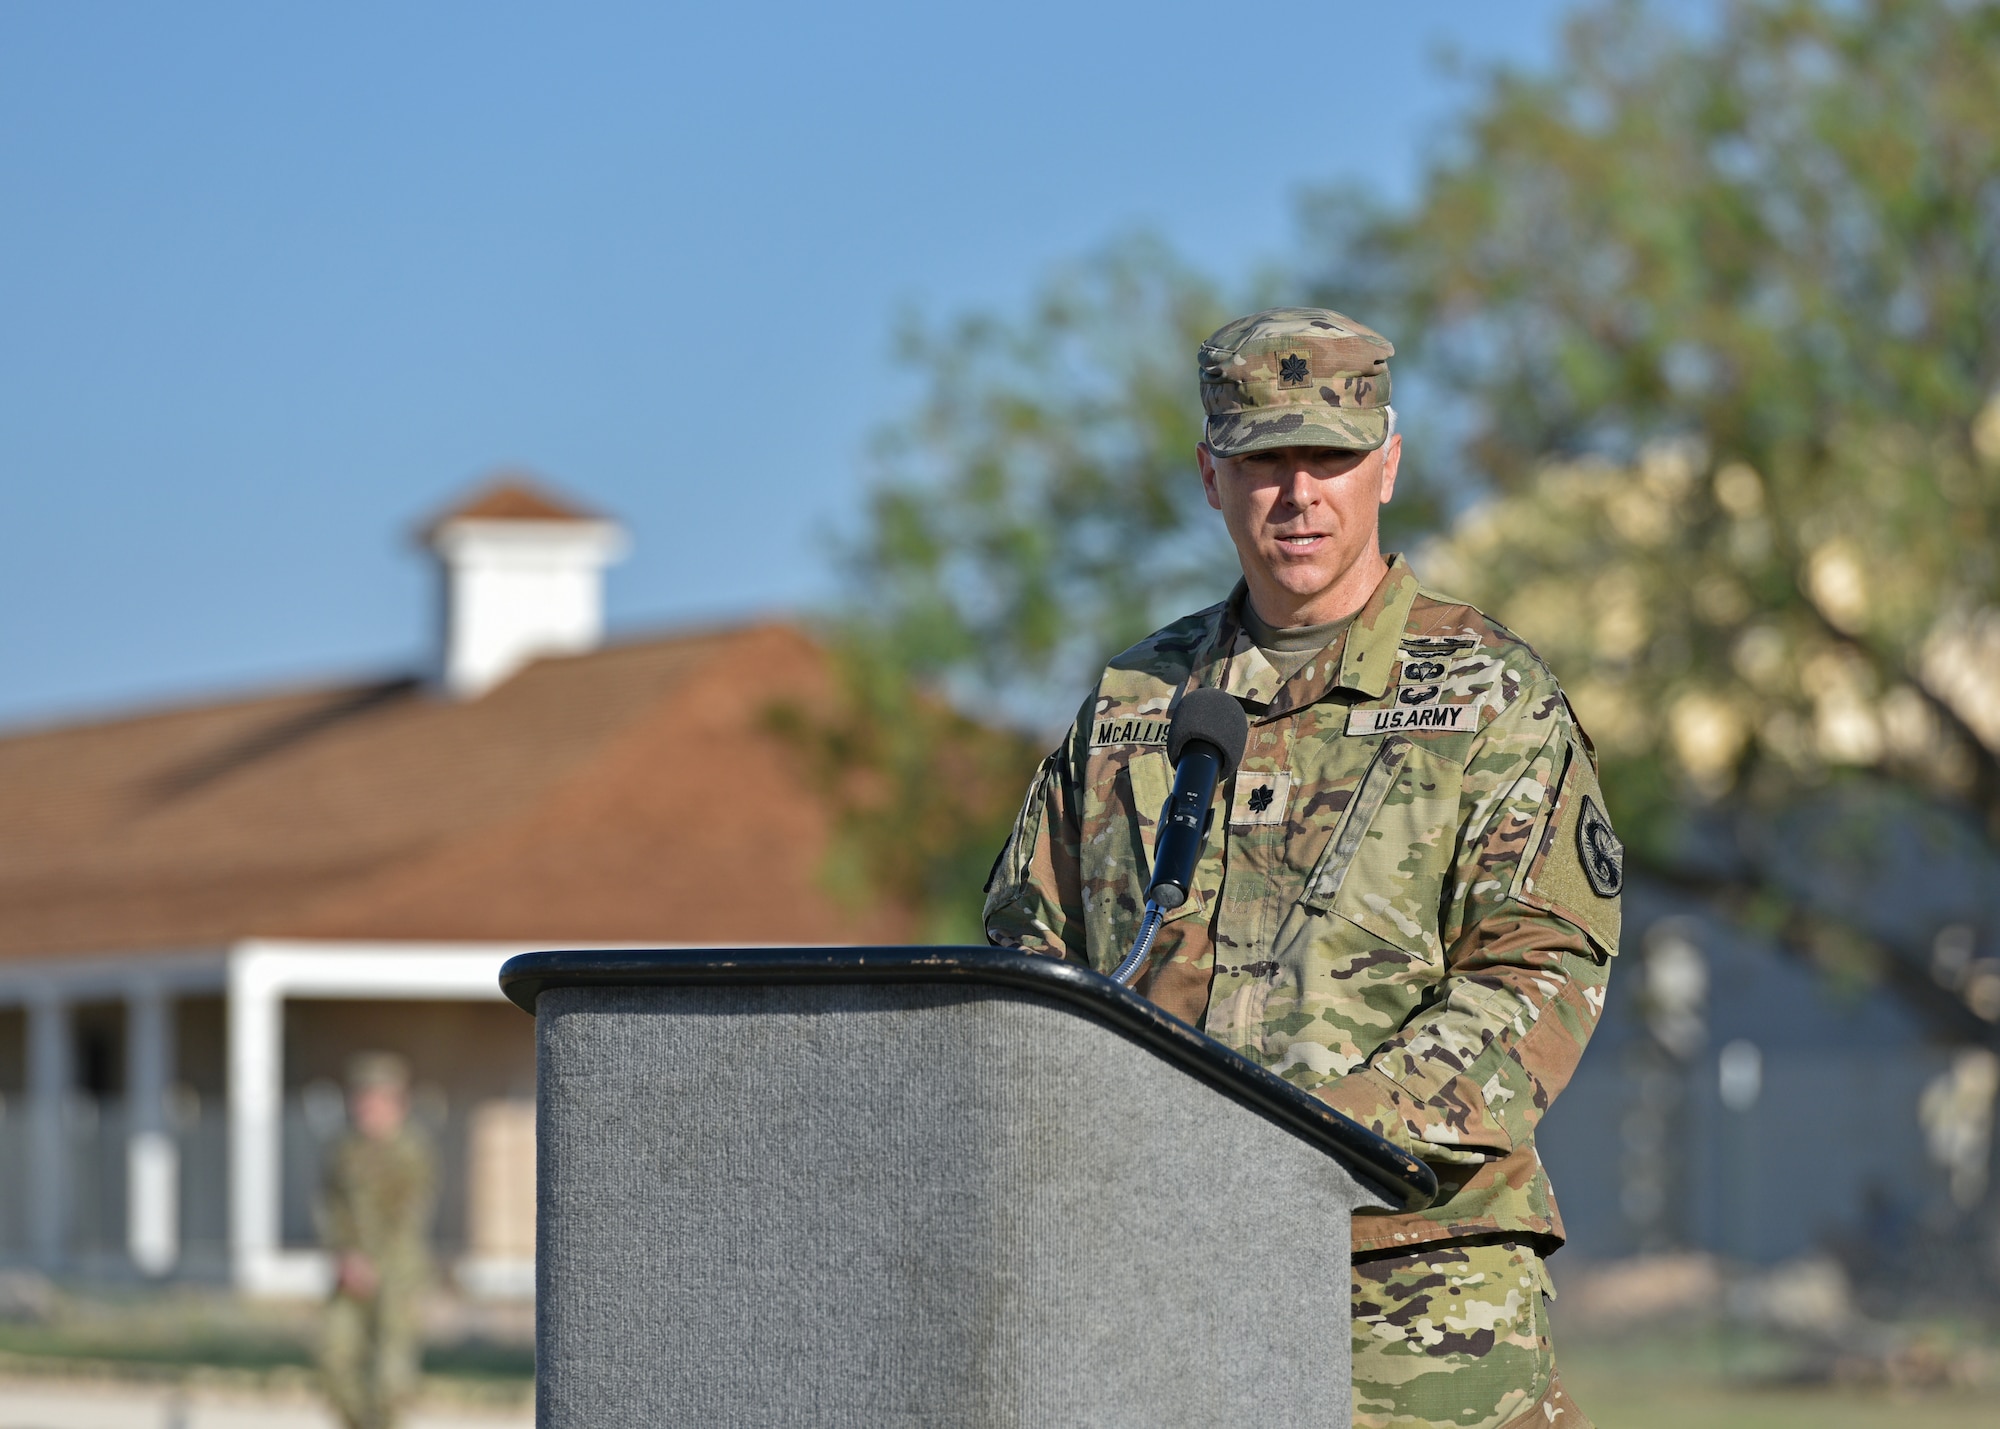 U.S. Army Lt. Col. John McAllister, incoming 344th Military Intelligence Battalion commander, speaks during the 344th MI BN change of command ceremony at Fort Concho, San Angelo, Texas, June 21, 2022. The ceremony was held at Fort Concho, which was established in 1867, and is a National Historical Landmark. (U.S. Air Force photo by Senior Airman Ashley Thrash)